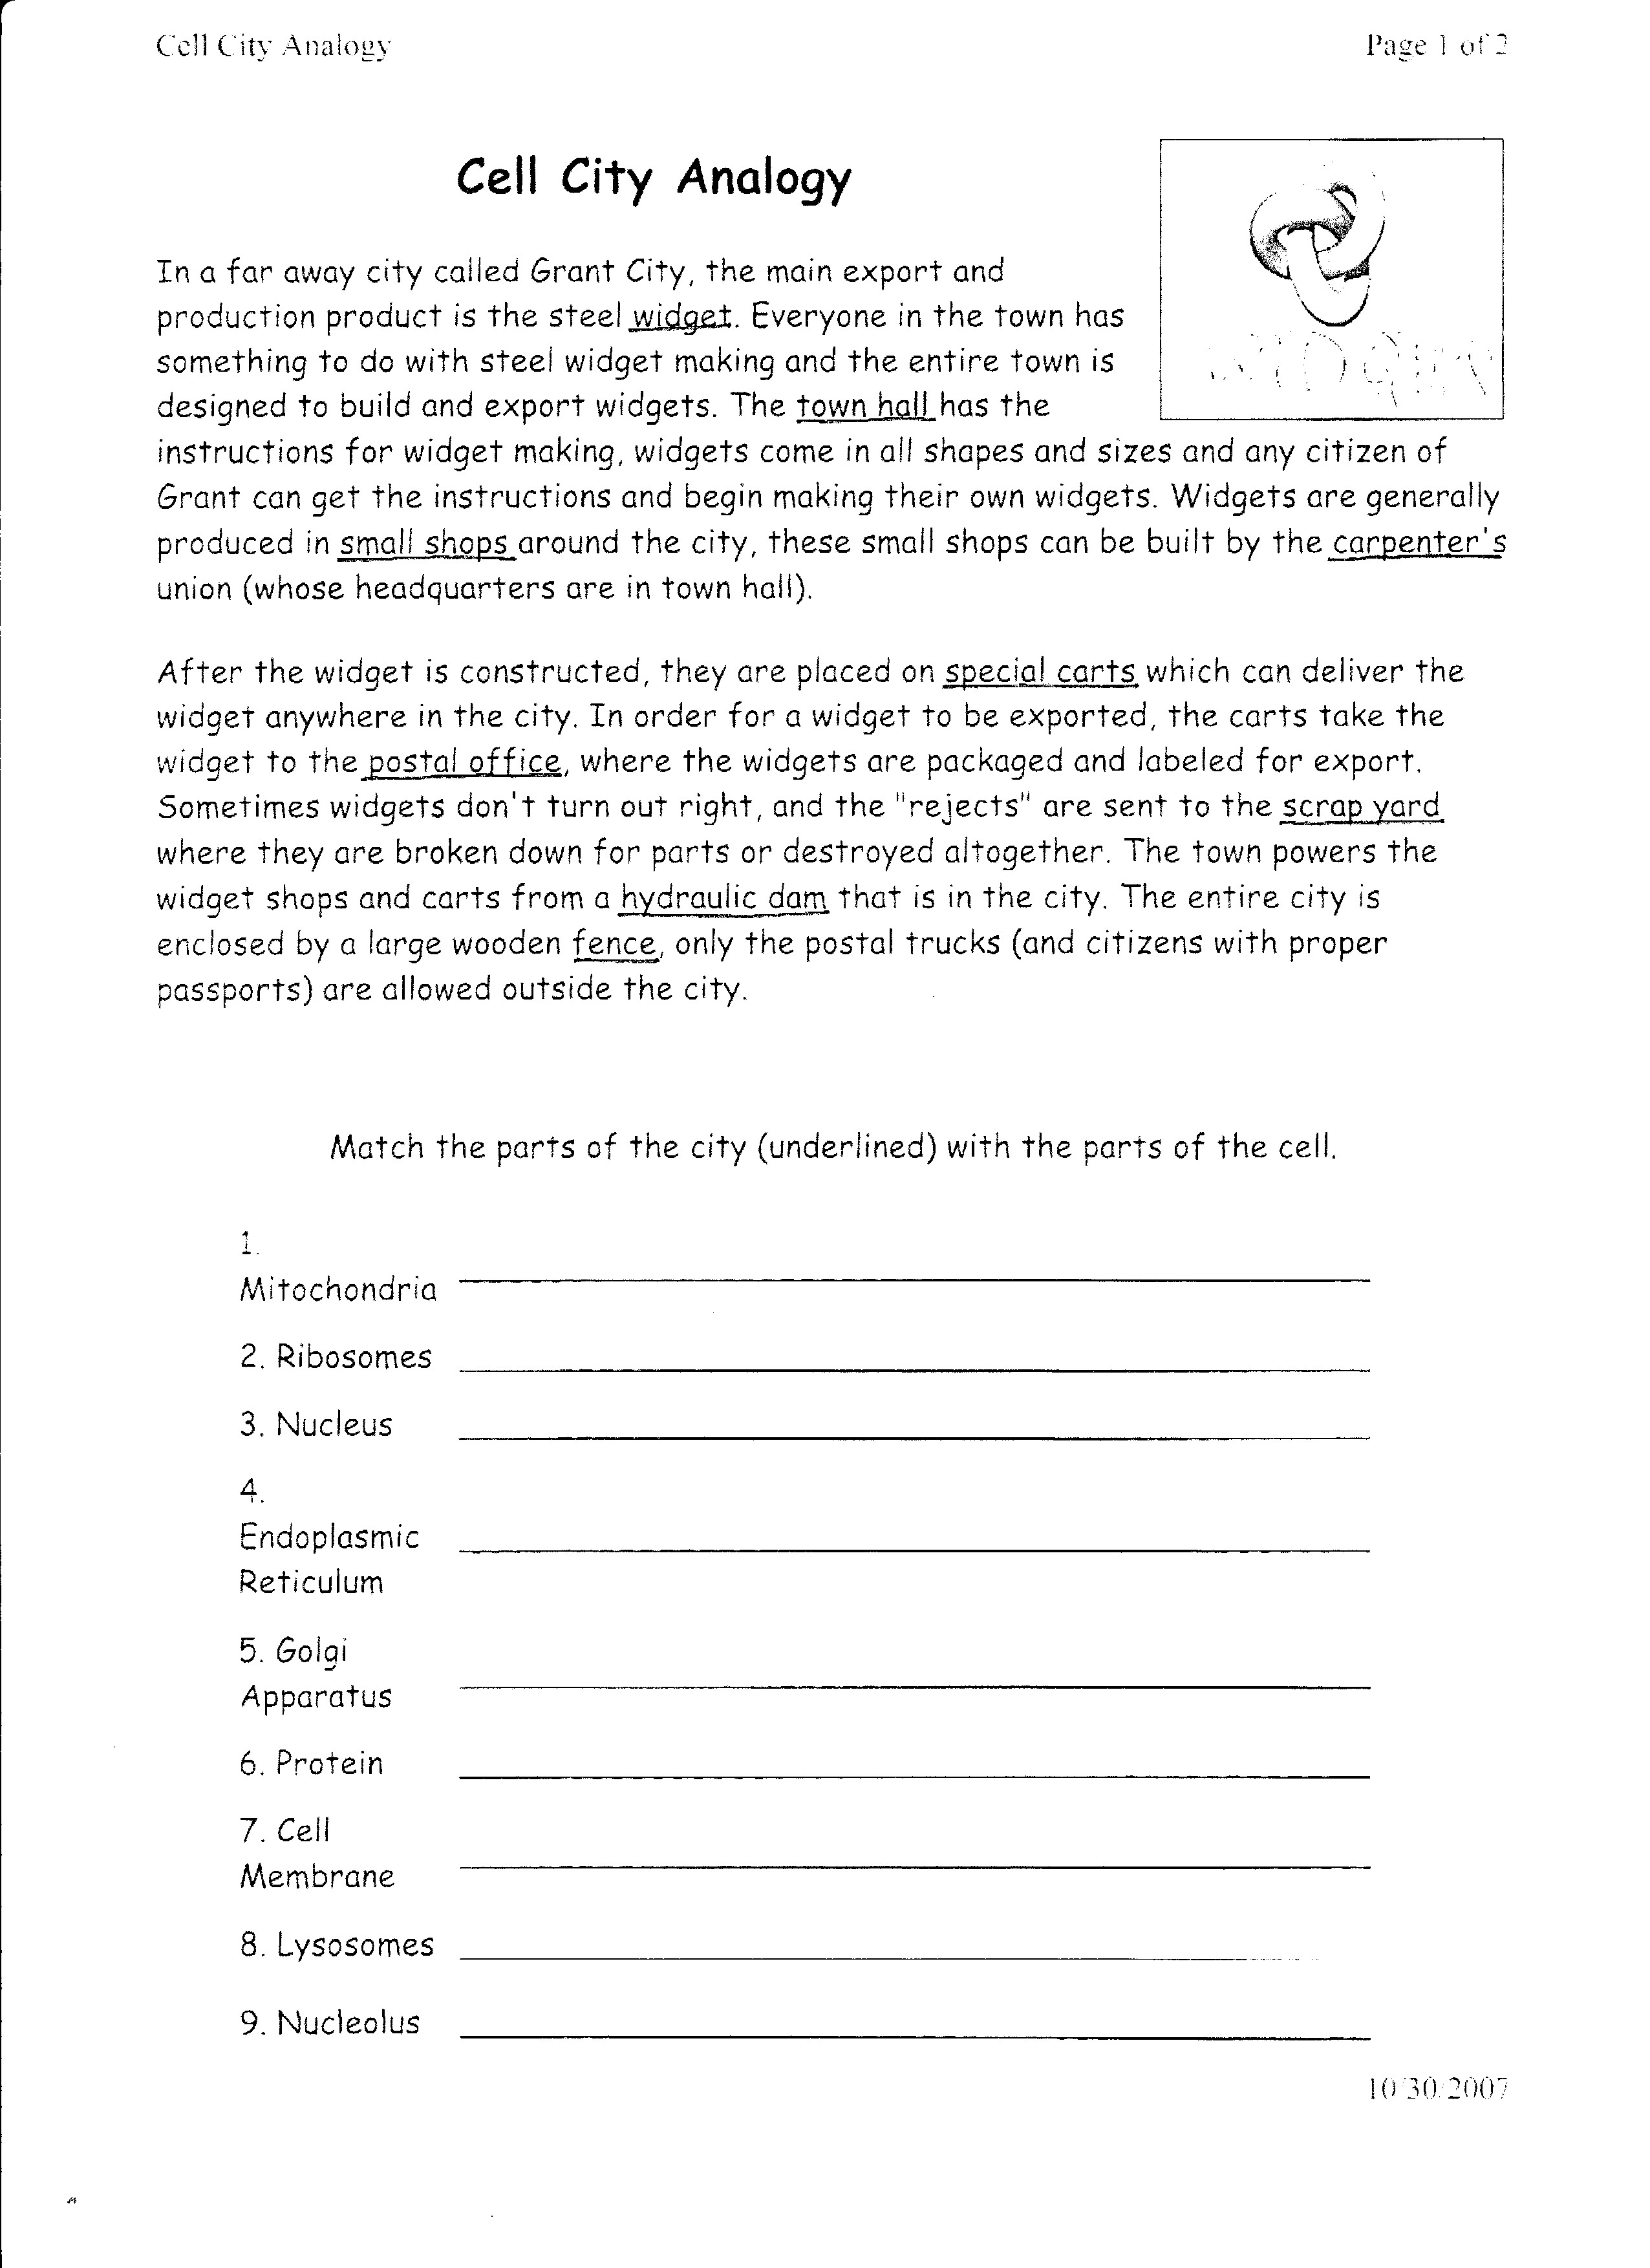 Printables Cell City Analogy Worksheet Answers Gozoneguide, Cell